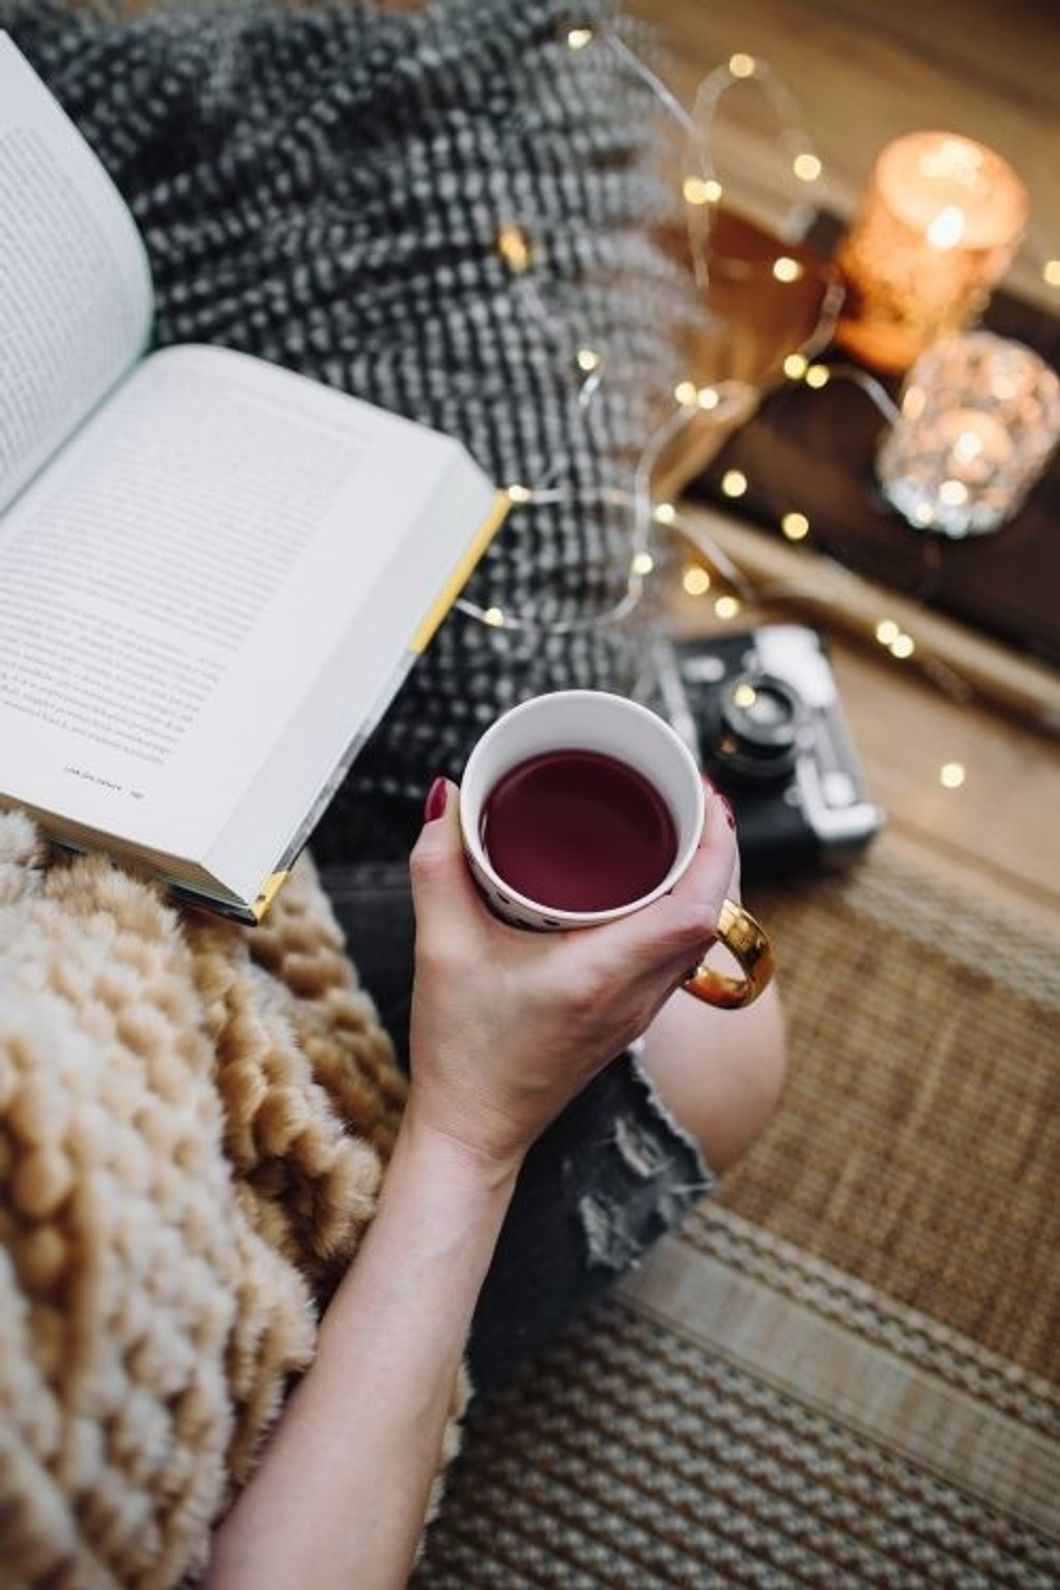 5 Ways to Make Your Life More 'Hygge'